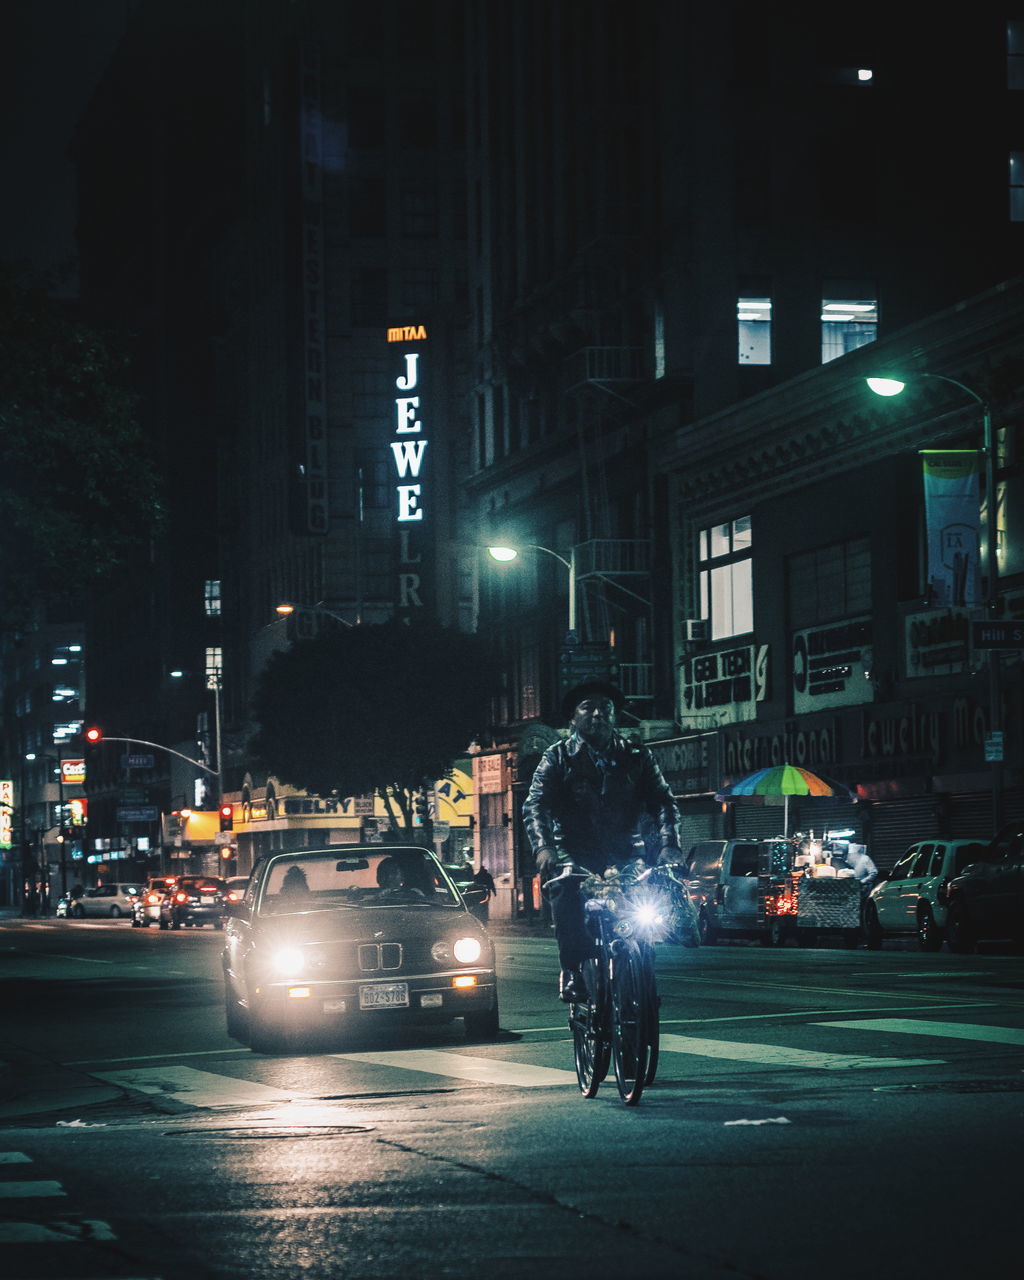 car, land vehicle, transportation, mode of transport, illuminated, city, built structure, street, architecture, night, road, on the move, building exterior, motion, travel, traffic, speed, city life, headlight, city street, blurred motion, rush hour, wet, riding, outdoors, crossroad, tail light